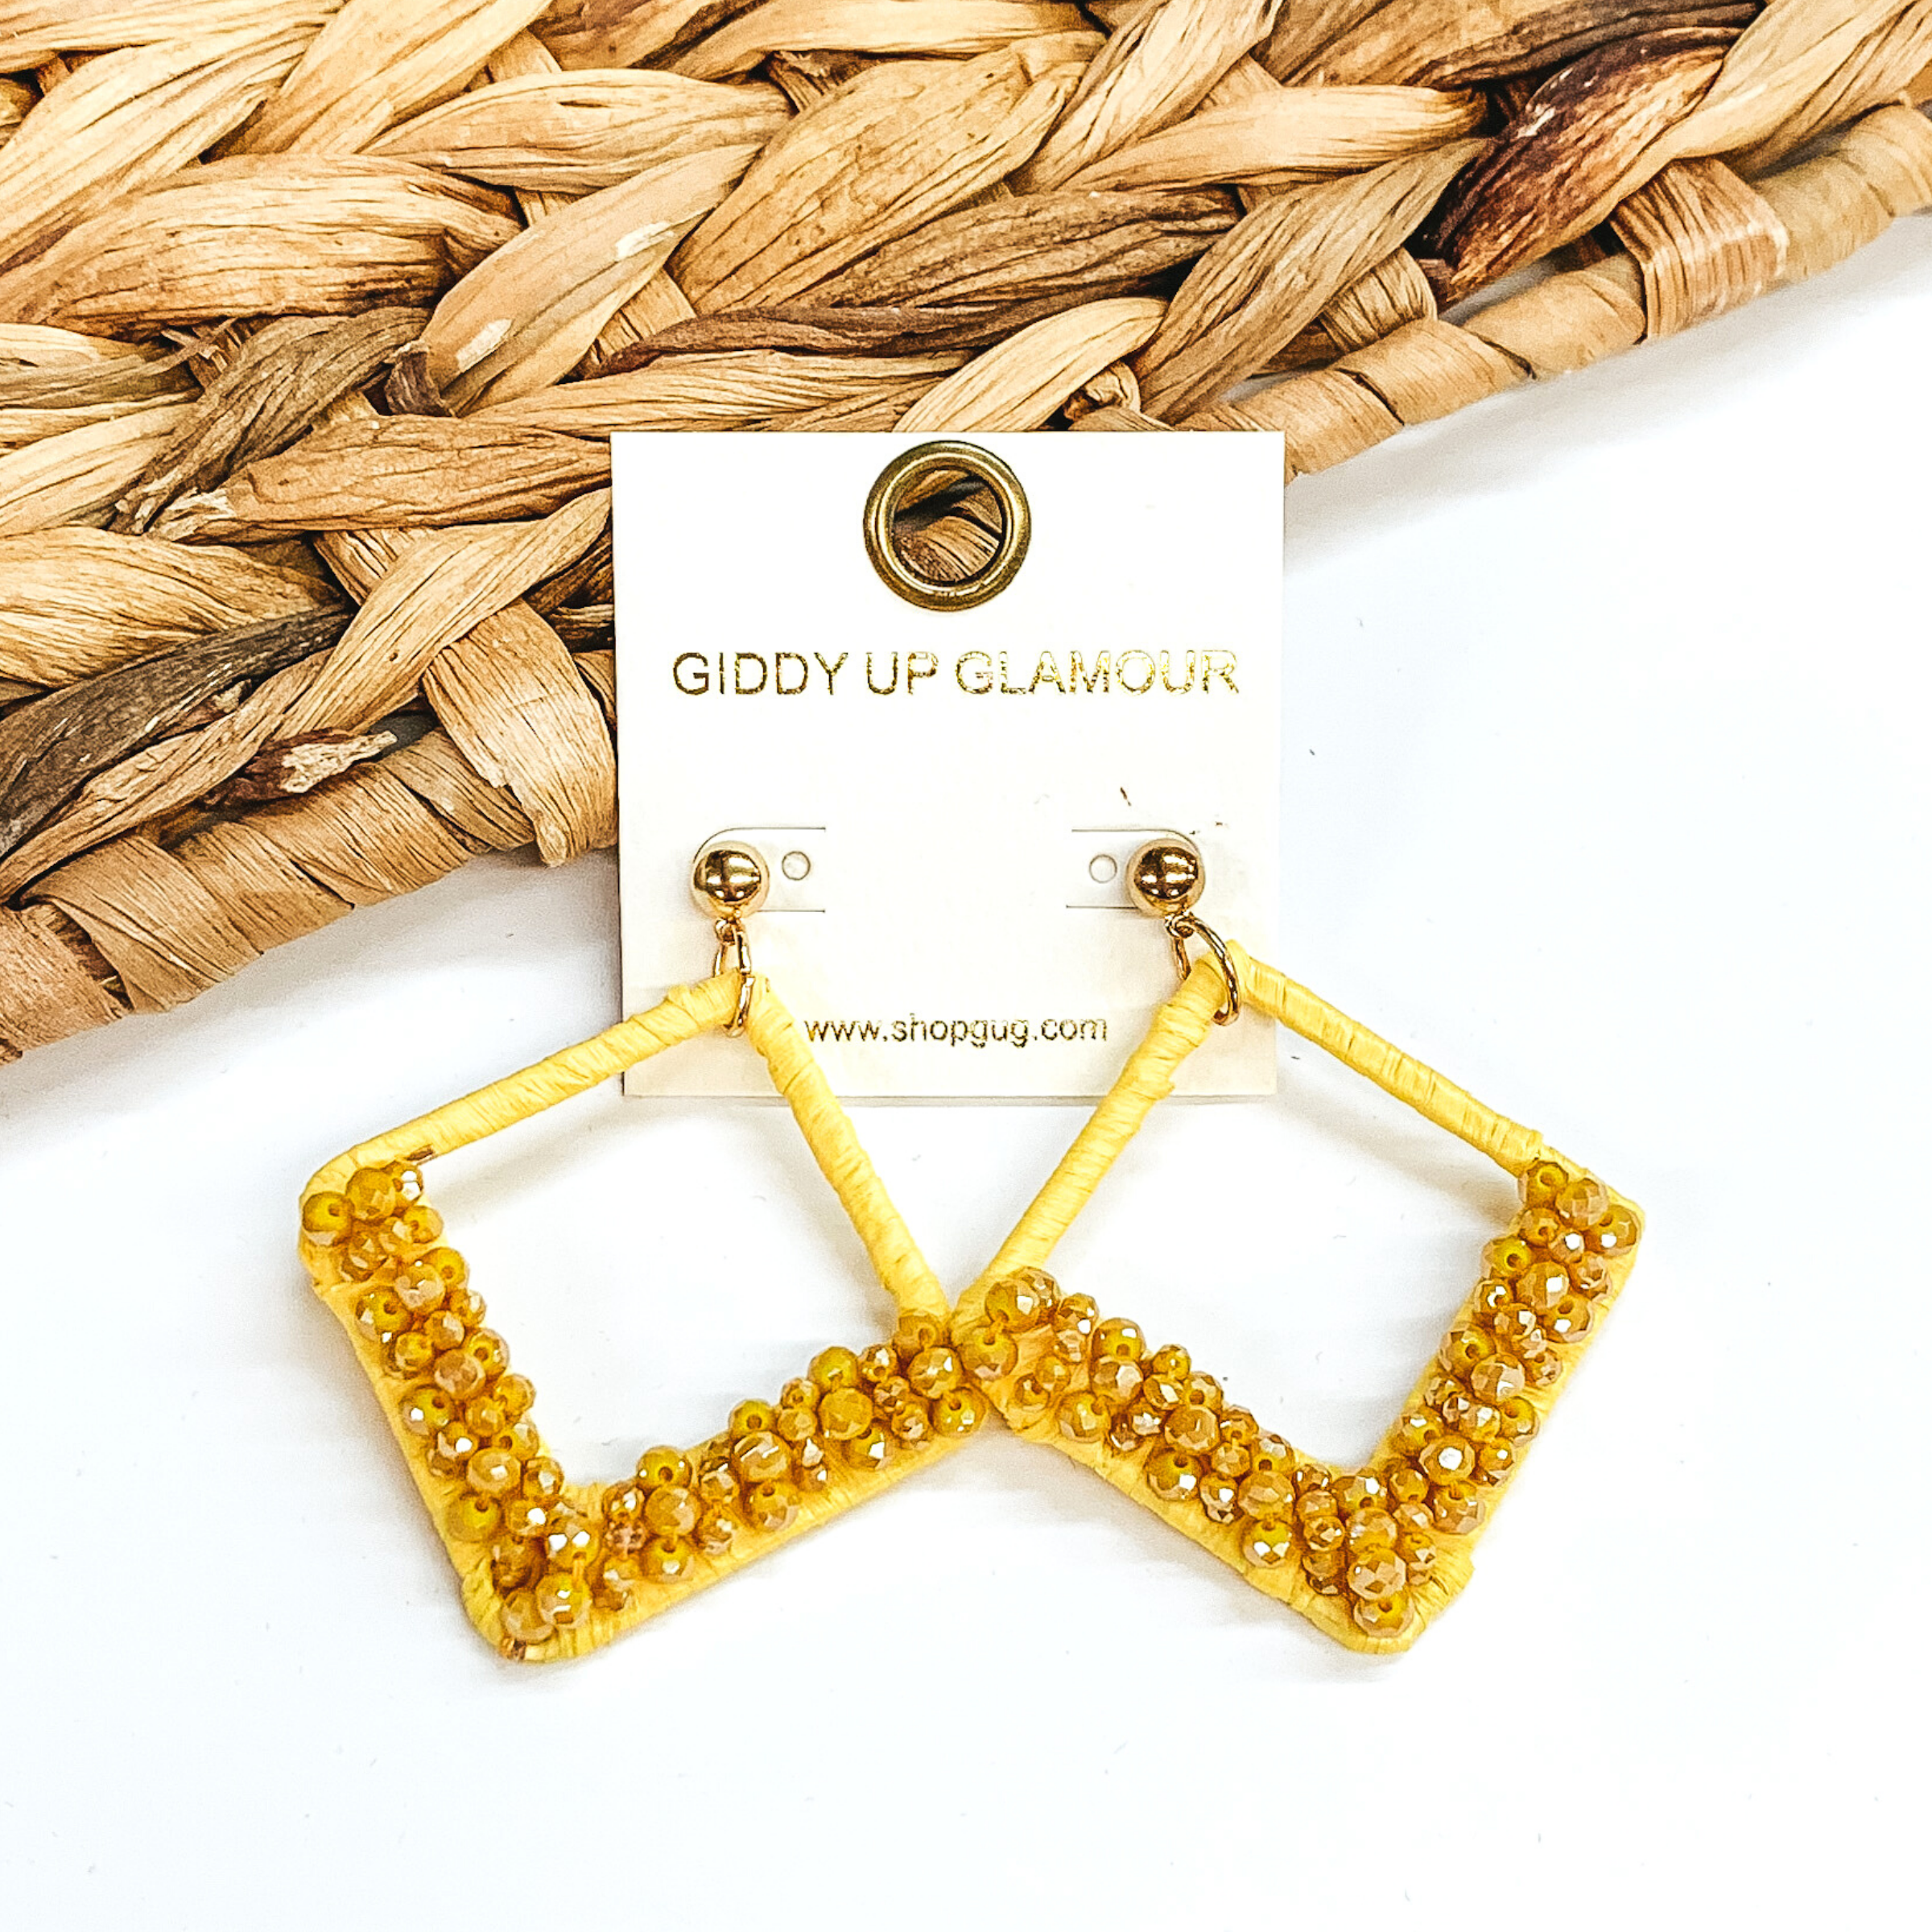 Open diamond shaped dangle earrings wrapped in raffia that includes a layer of beads on the bottom half of the earrings. These earrings are yellow in color. These earrings are pictured on on a white background with basket weave decor.